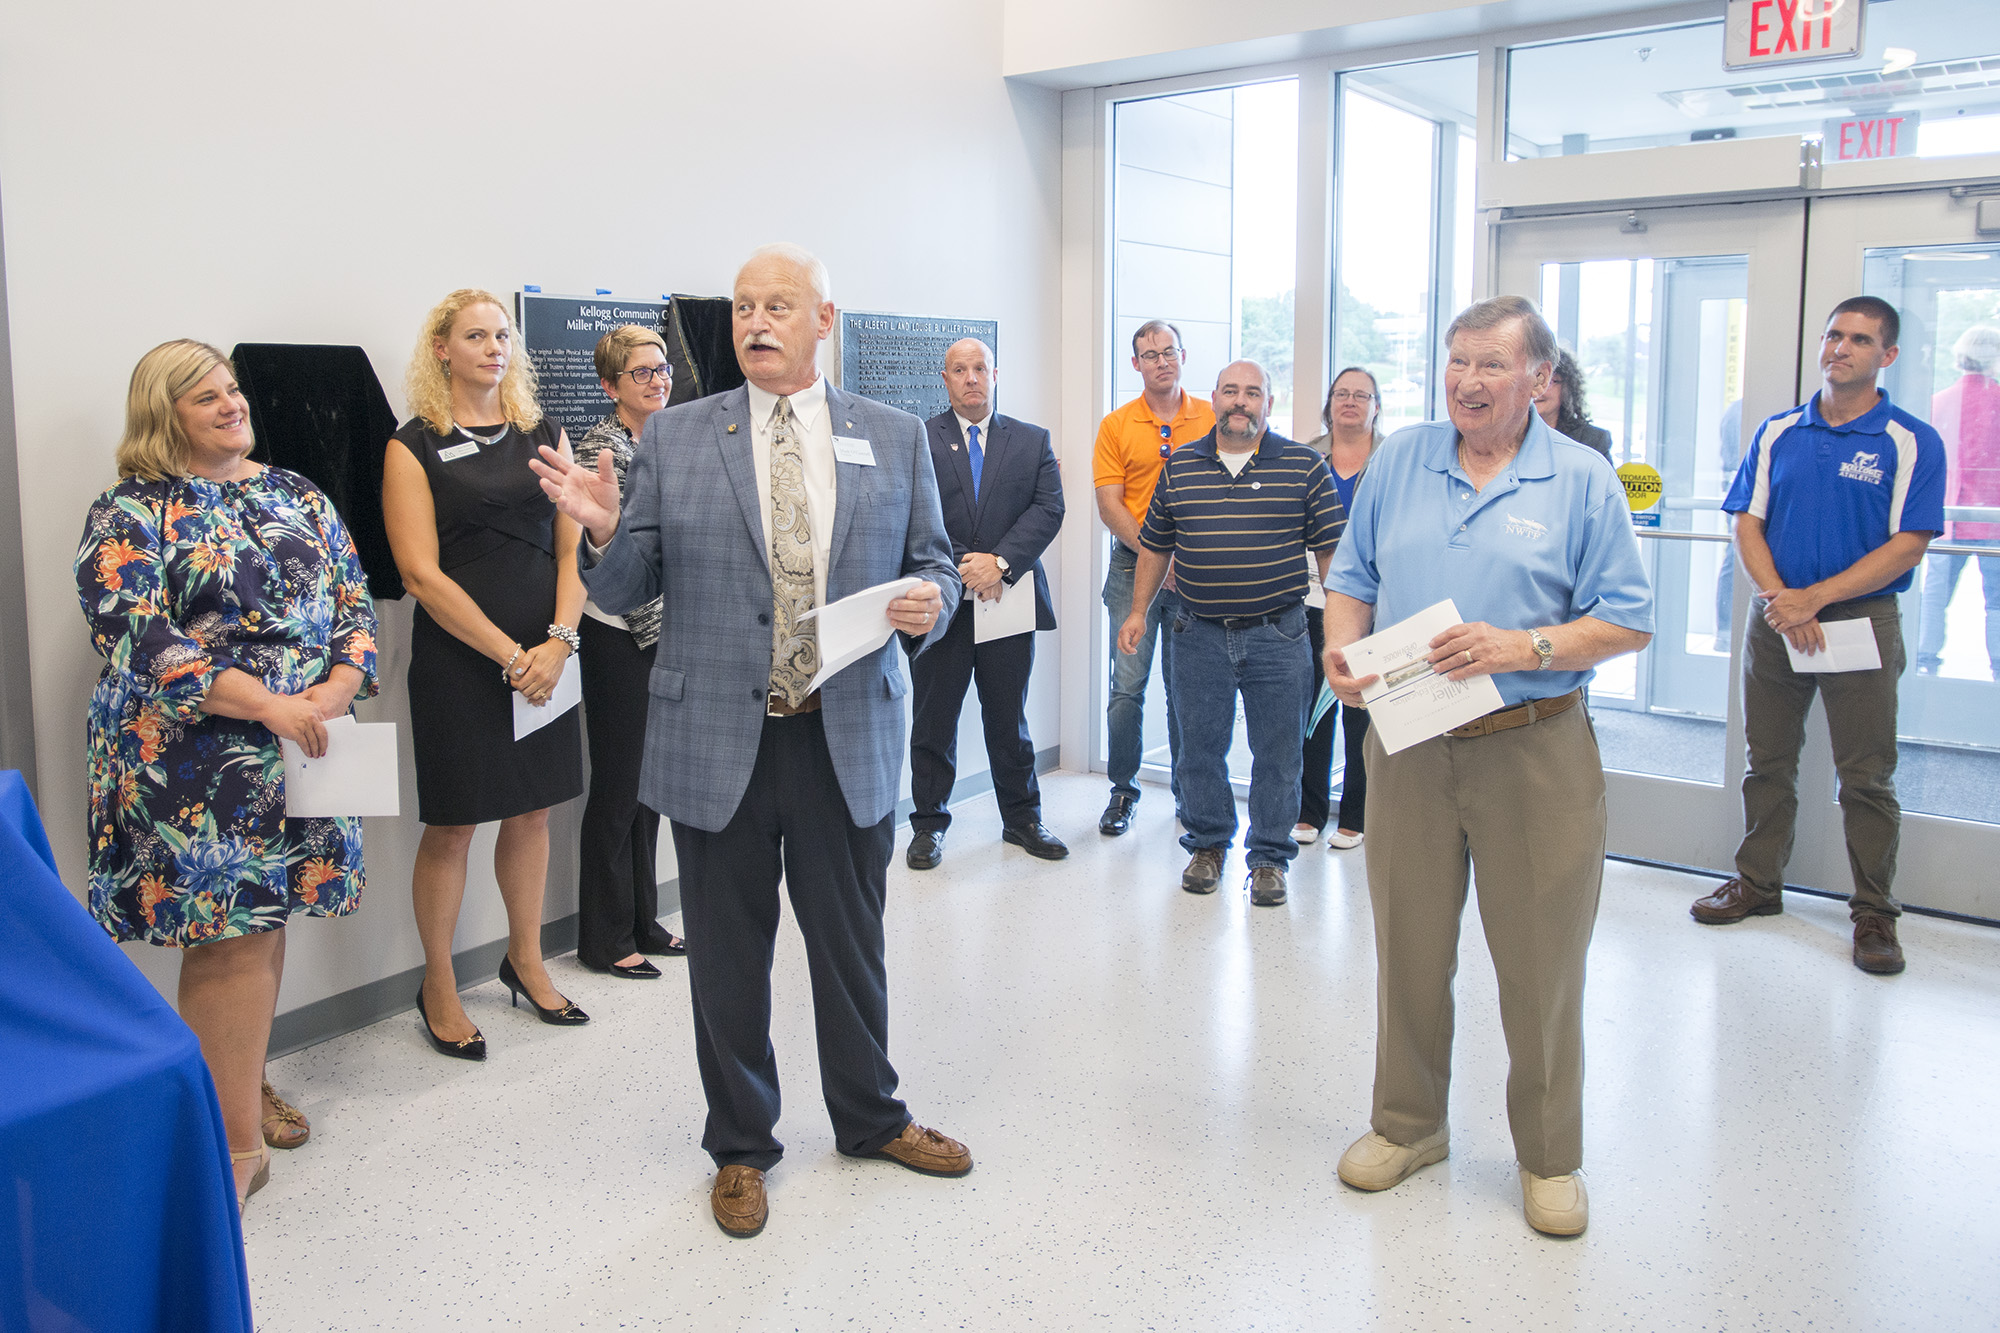 KCC President Mark O'Connell, front left, recognizes Al Bobrofsky, front right, during KCC's Miller Building open house and dedication event Aug. 7.